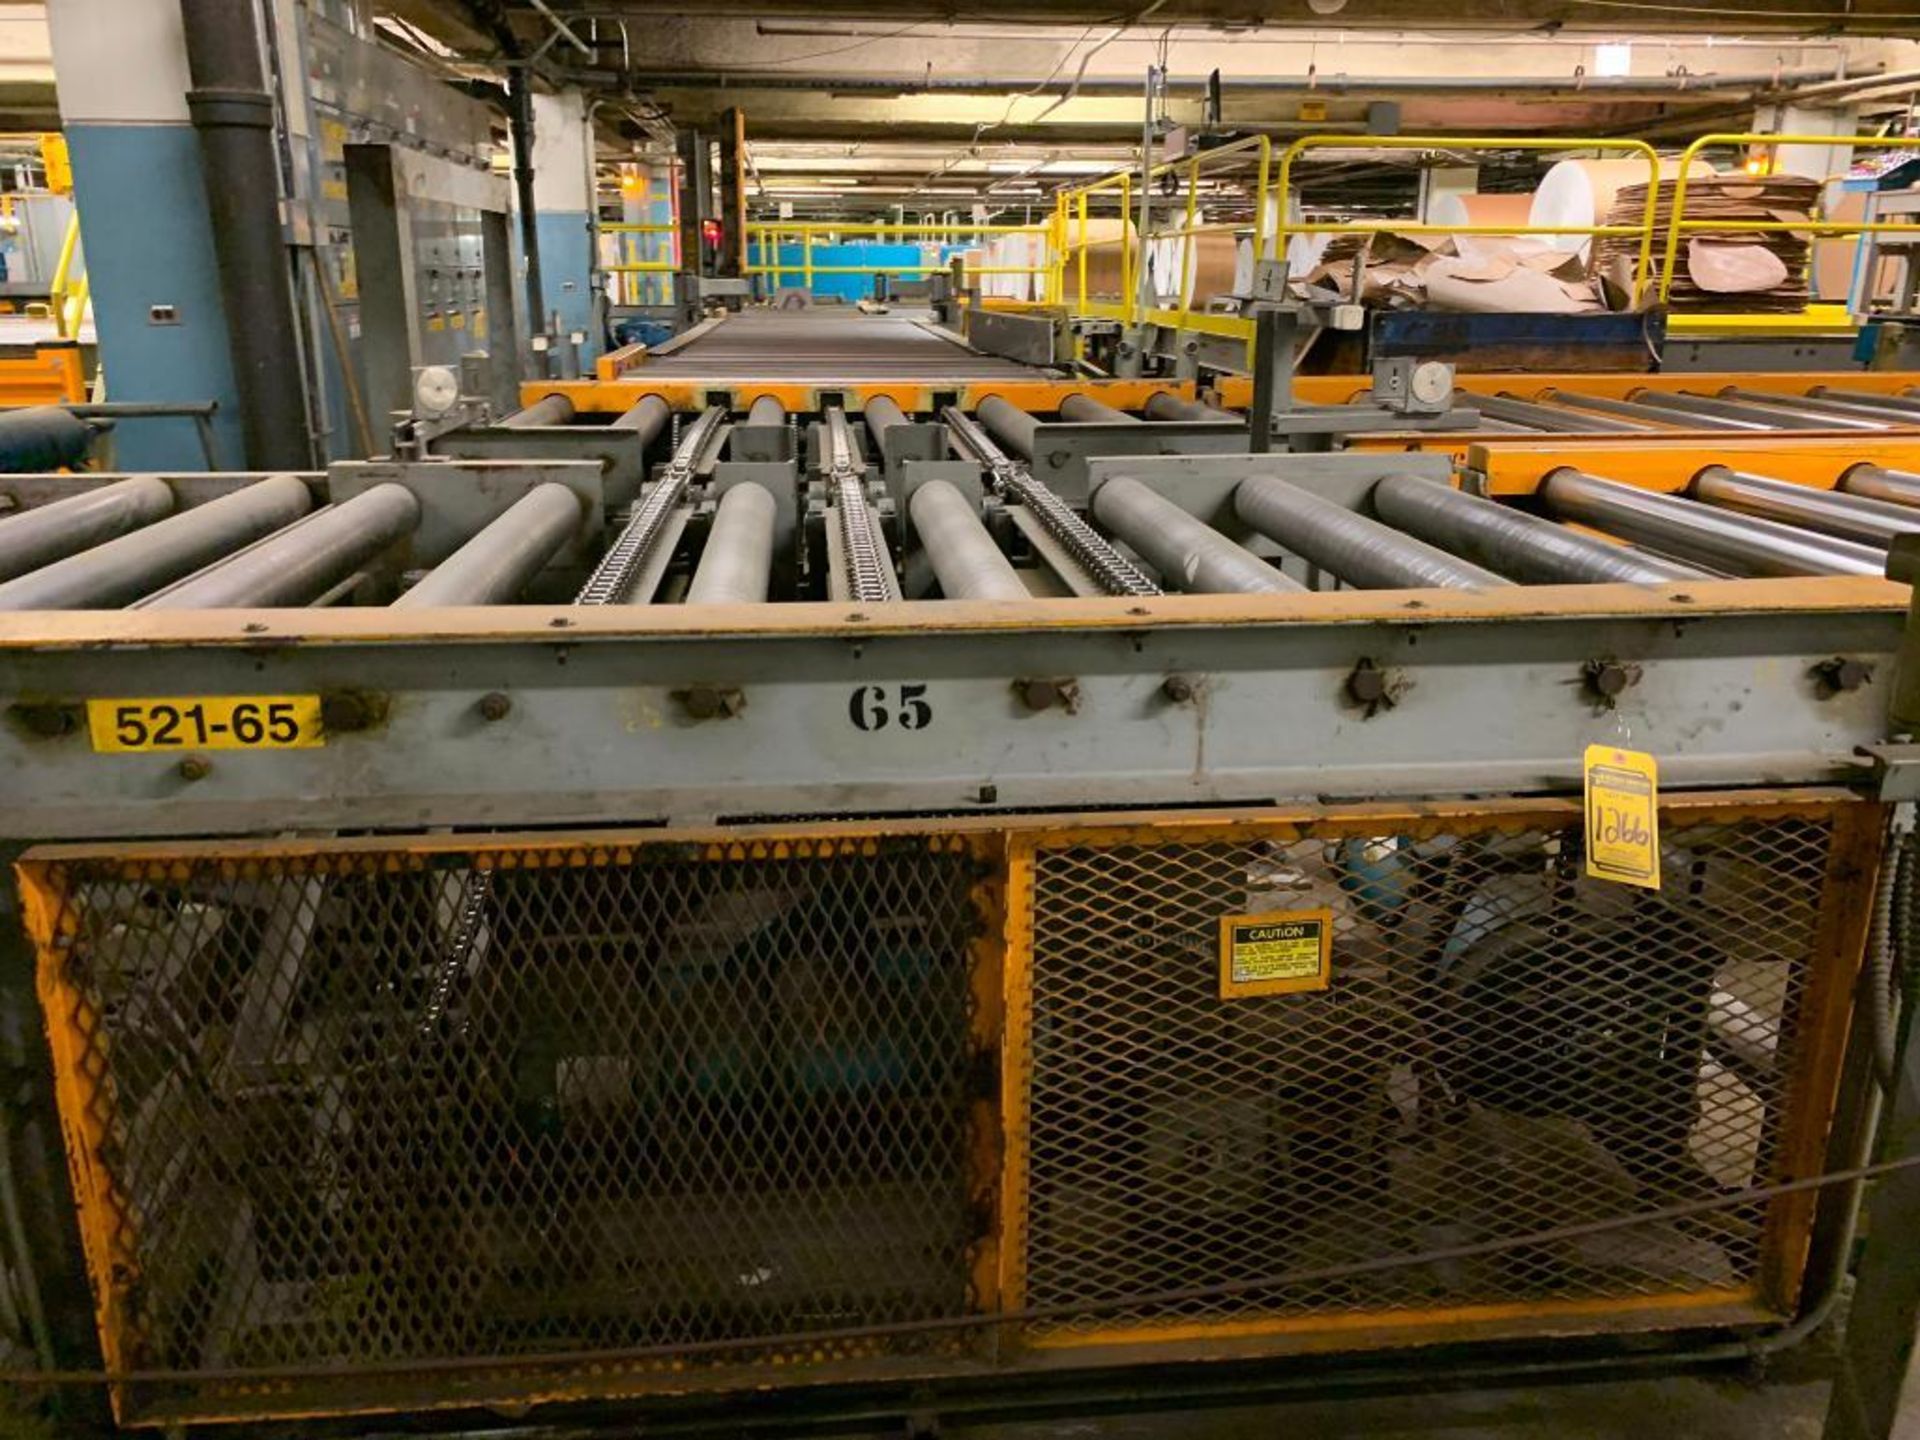 350' of Steel Power Roller/Plate 48" Conveyor, (6) 103" Hydraulic Lift Gate Sections, Photo Switches - Image 4 of 18